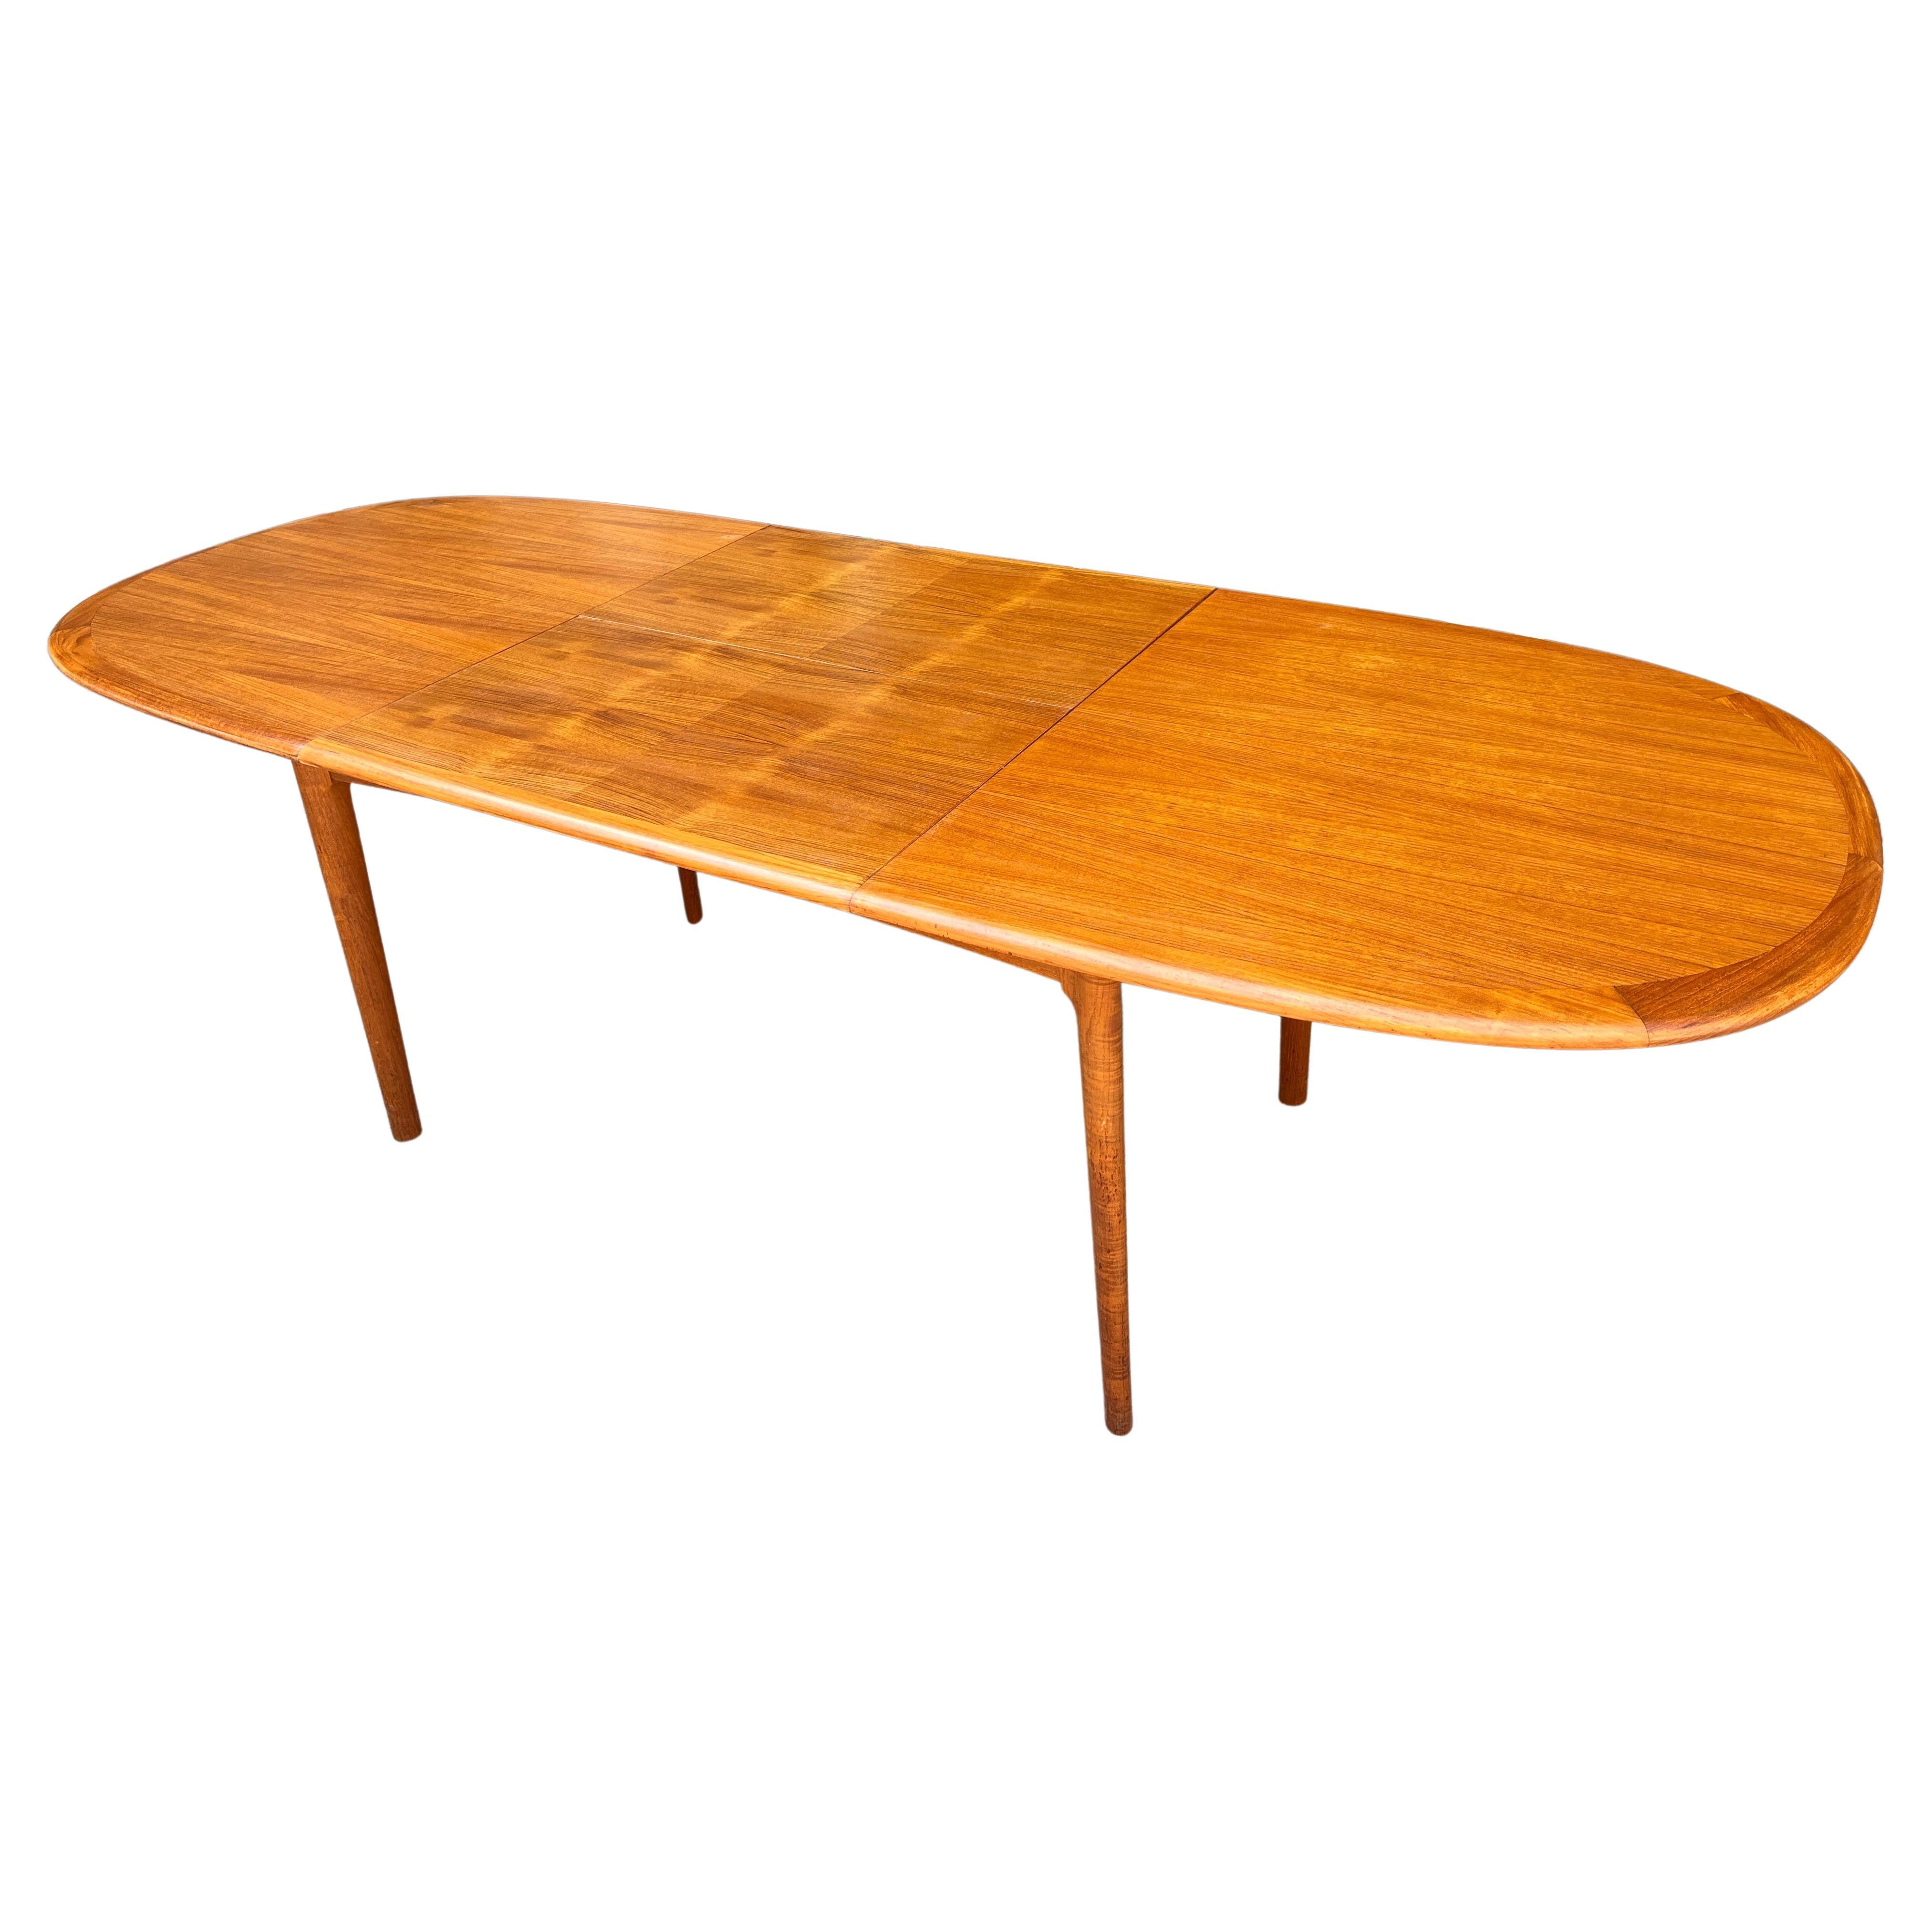 Midcentury Elliptical Oval Teak Expandable Dining Table  In Good Condition For Sale In BROOKLYN, NY